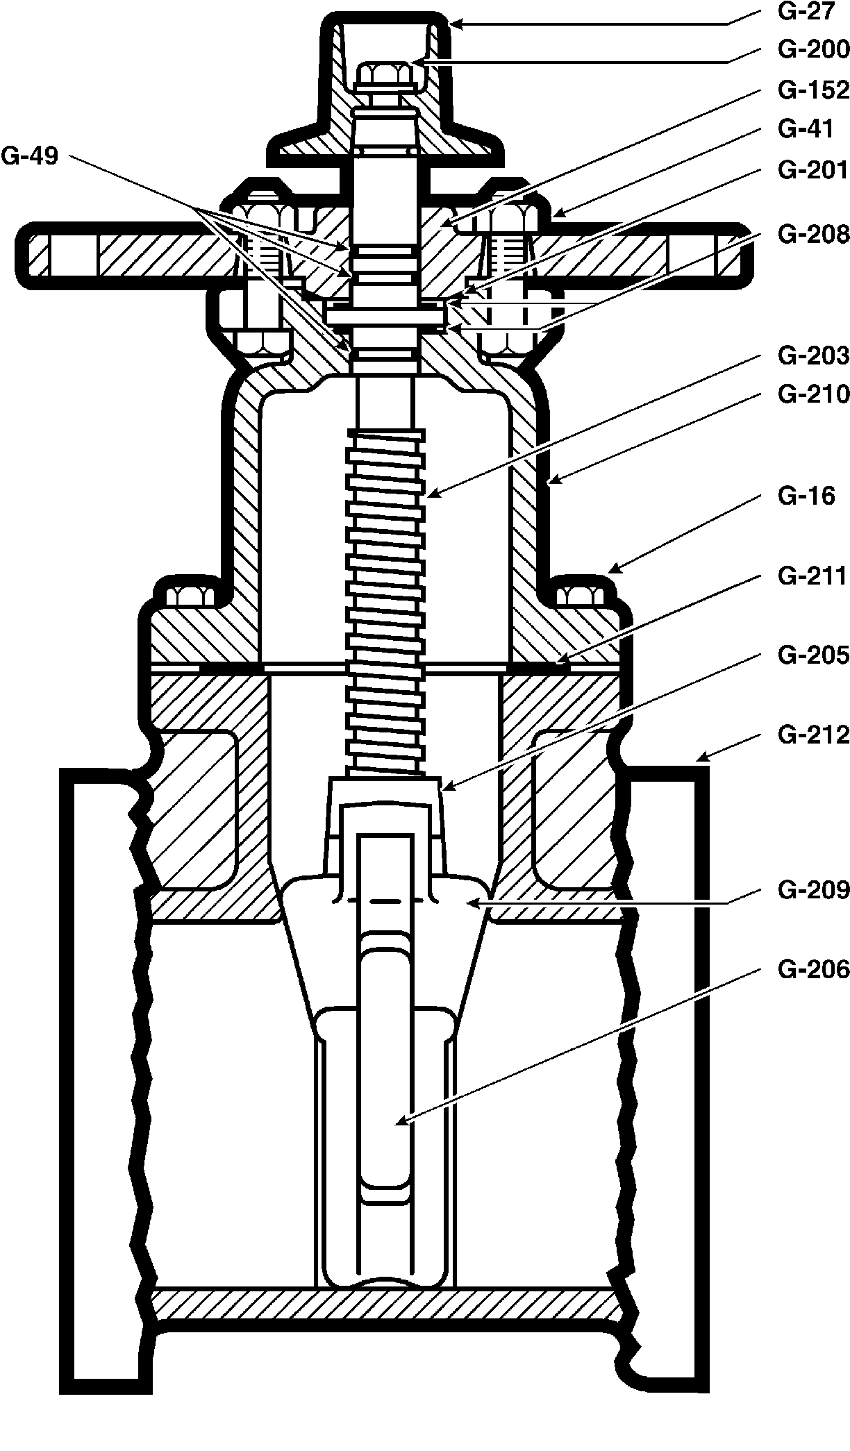 P-USP1-6 FLxFL 4-12in Parts Drawing